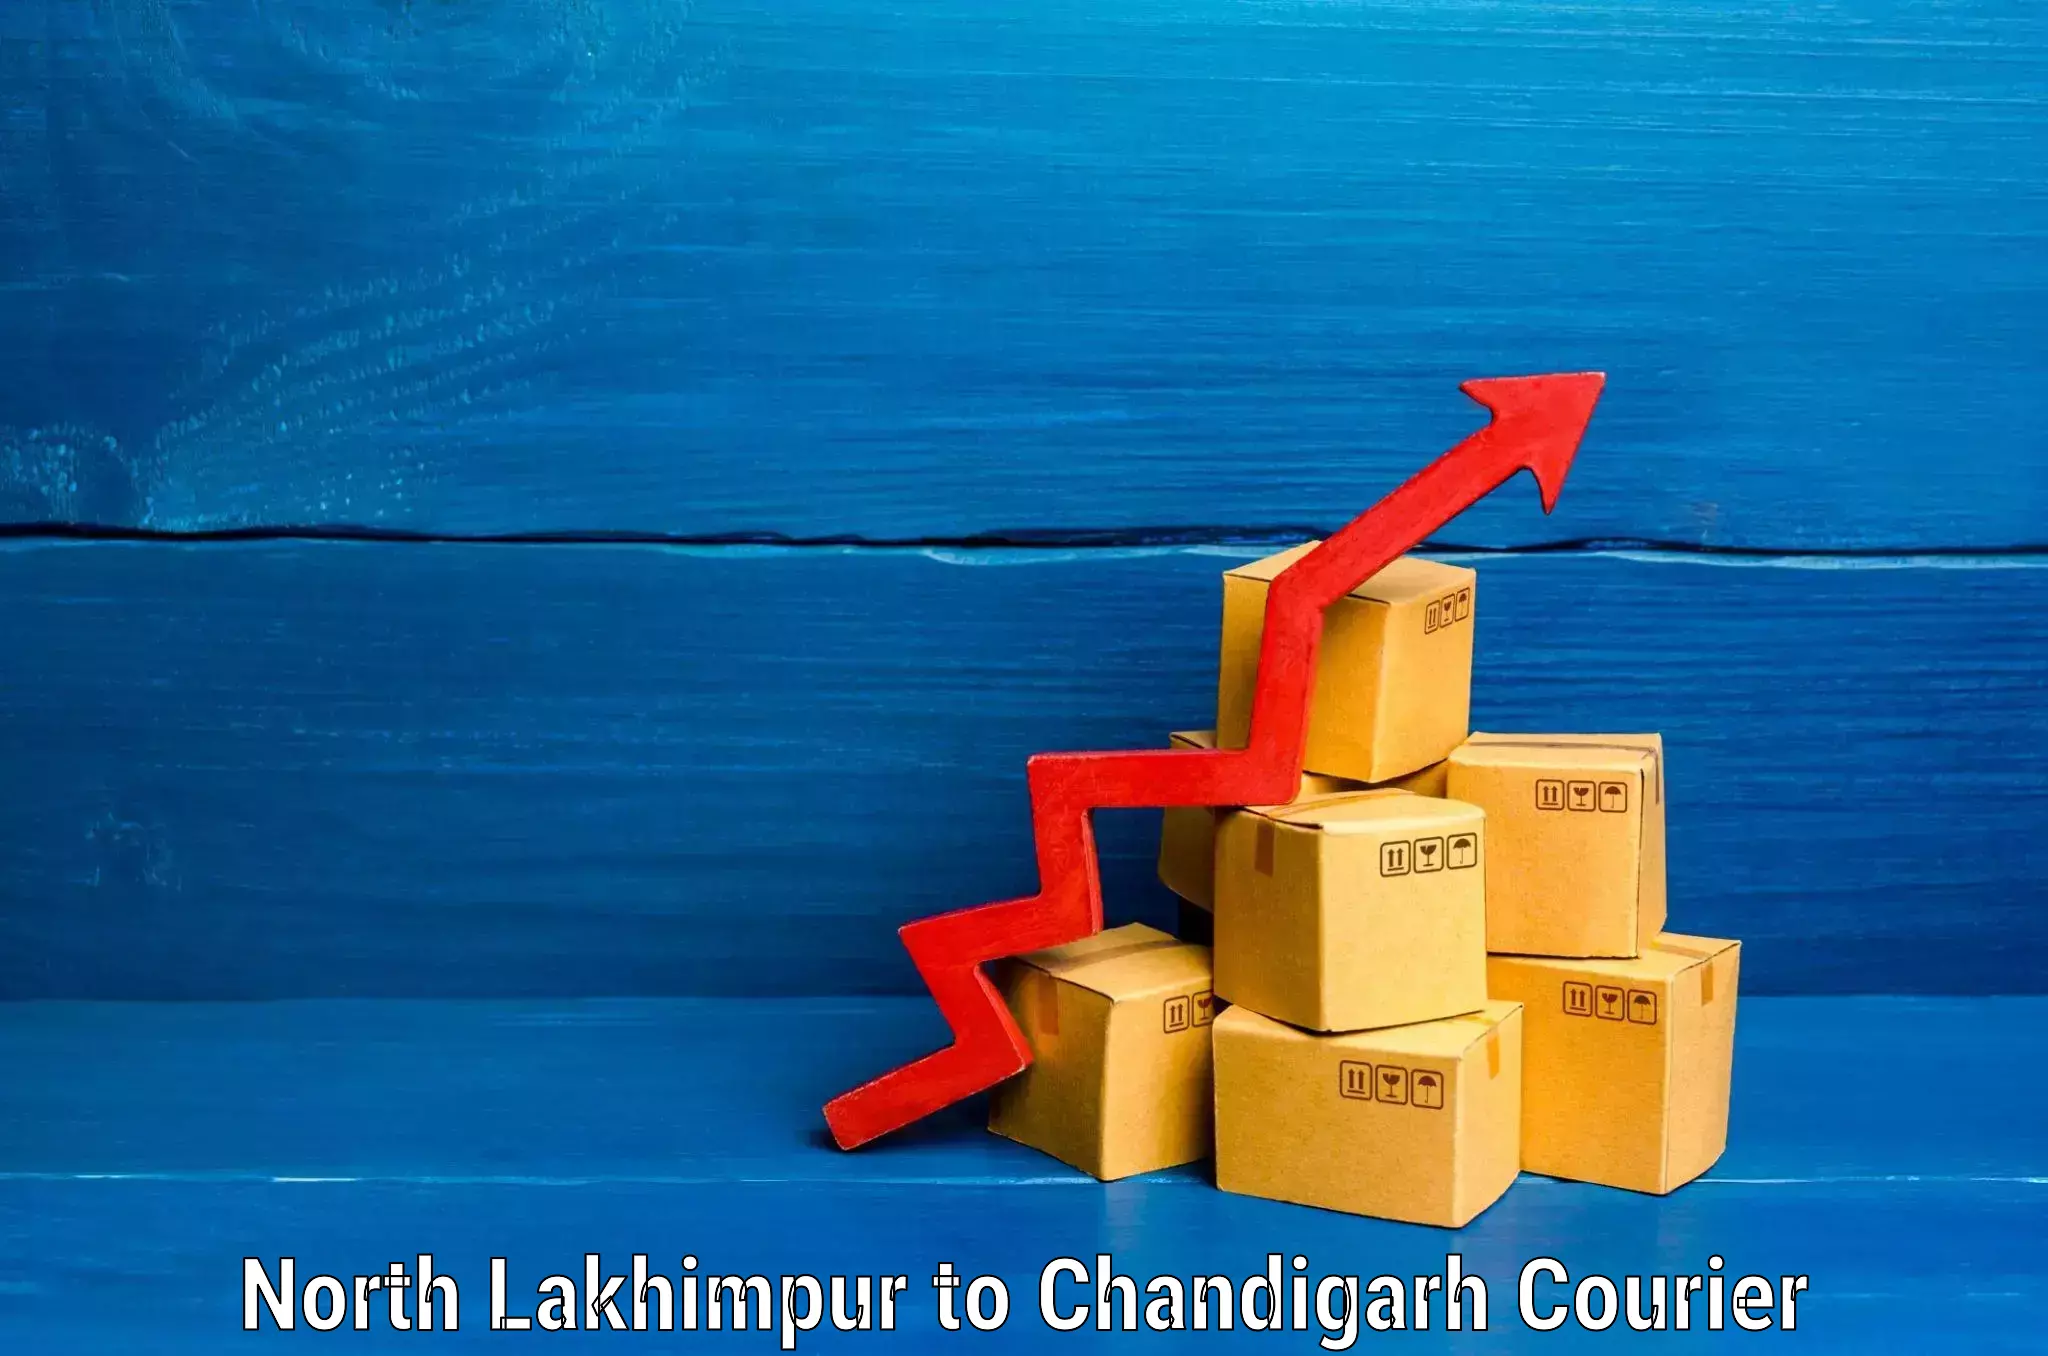 Baggage transport professionals in North Lakhimpur to Chandigarh